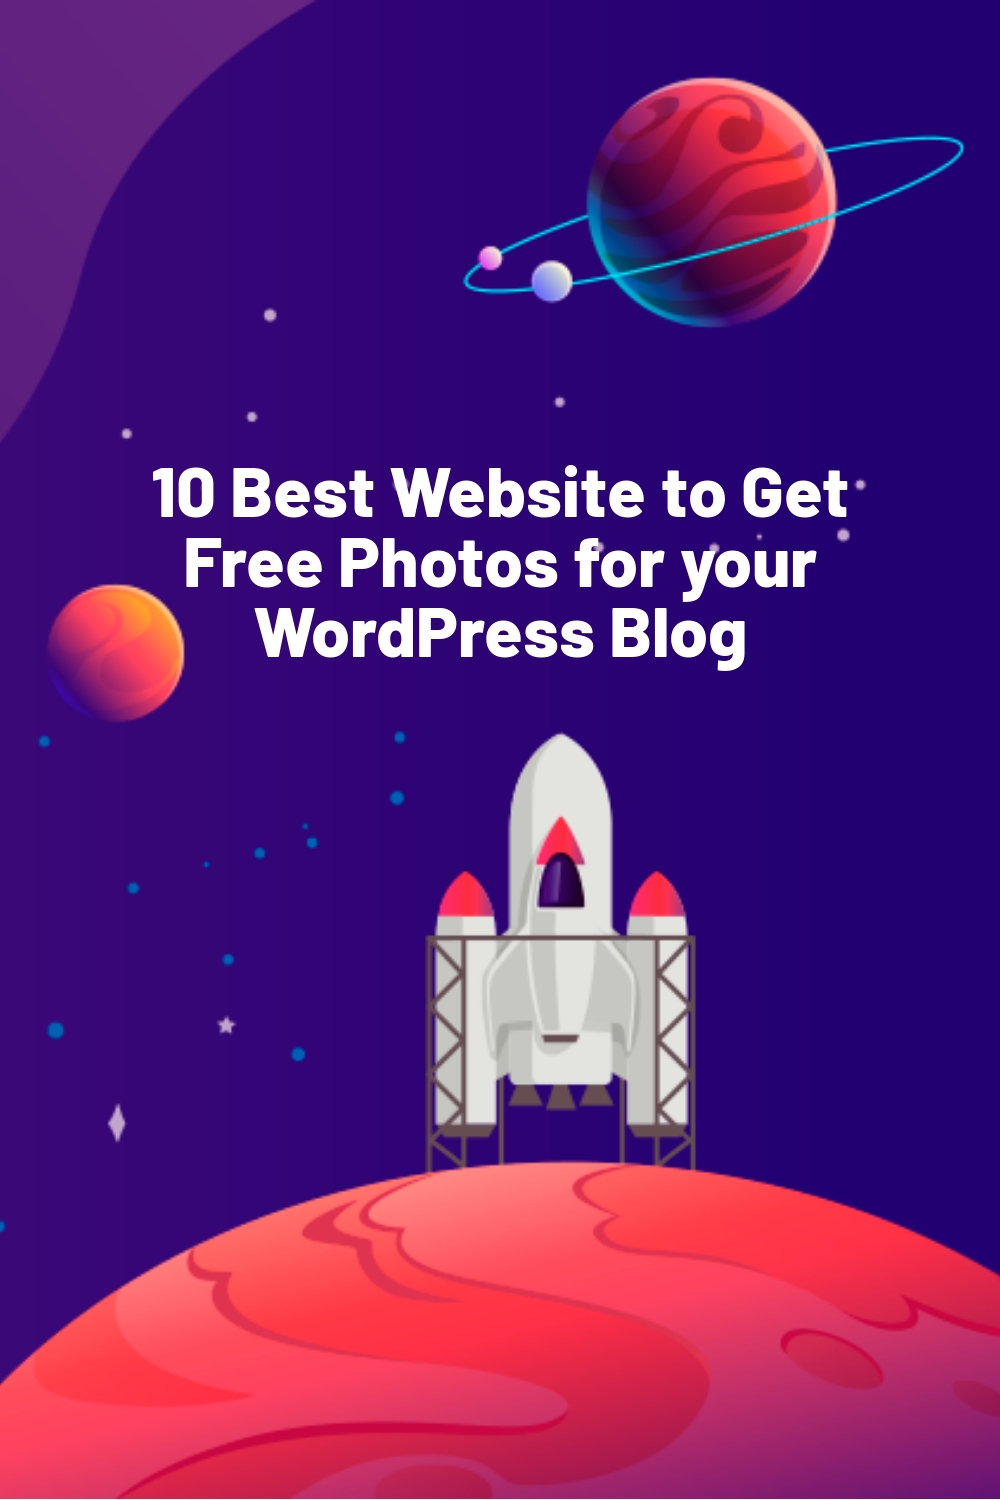 10 Best Website to Get Free Photos for your WordPress Blog